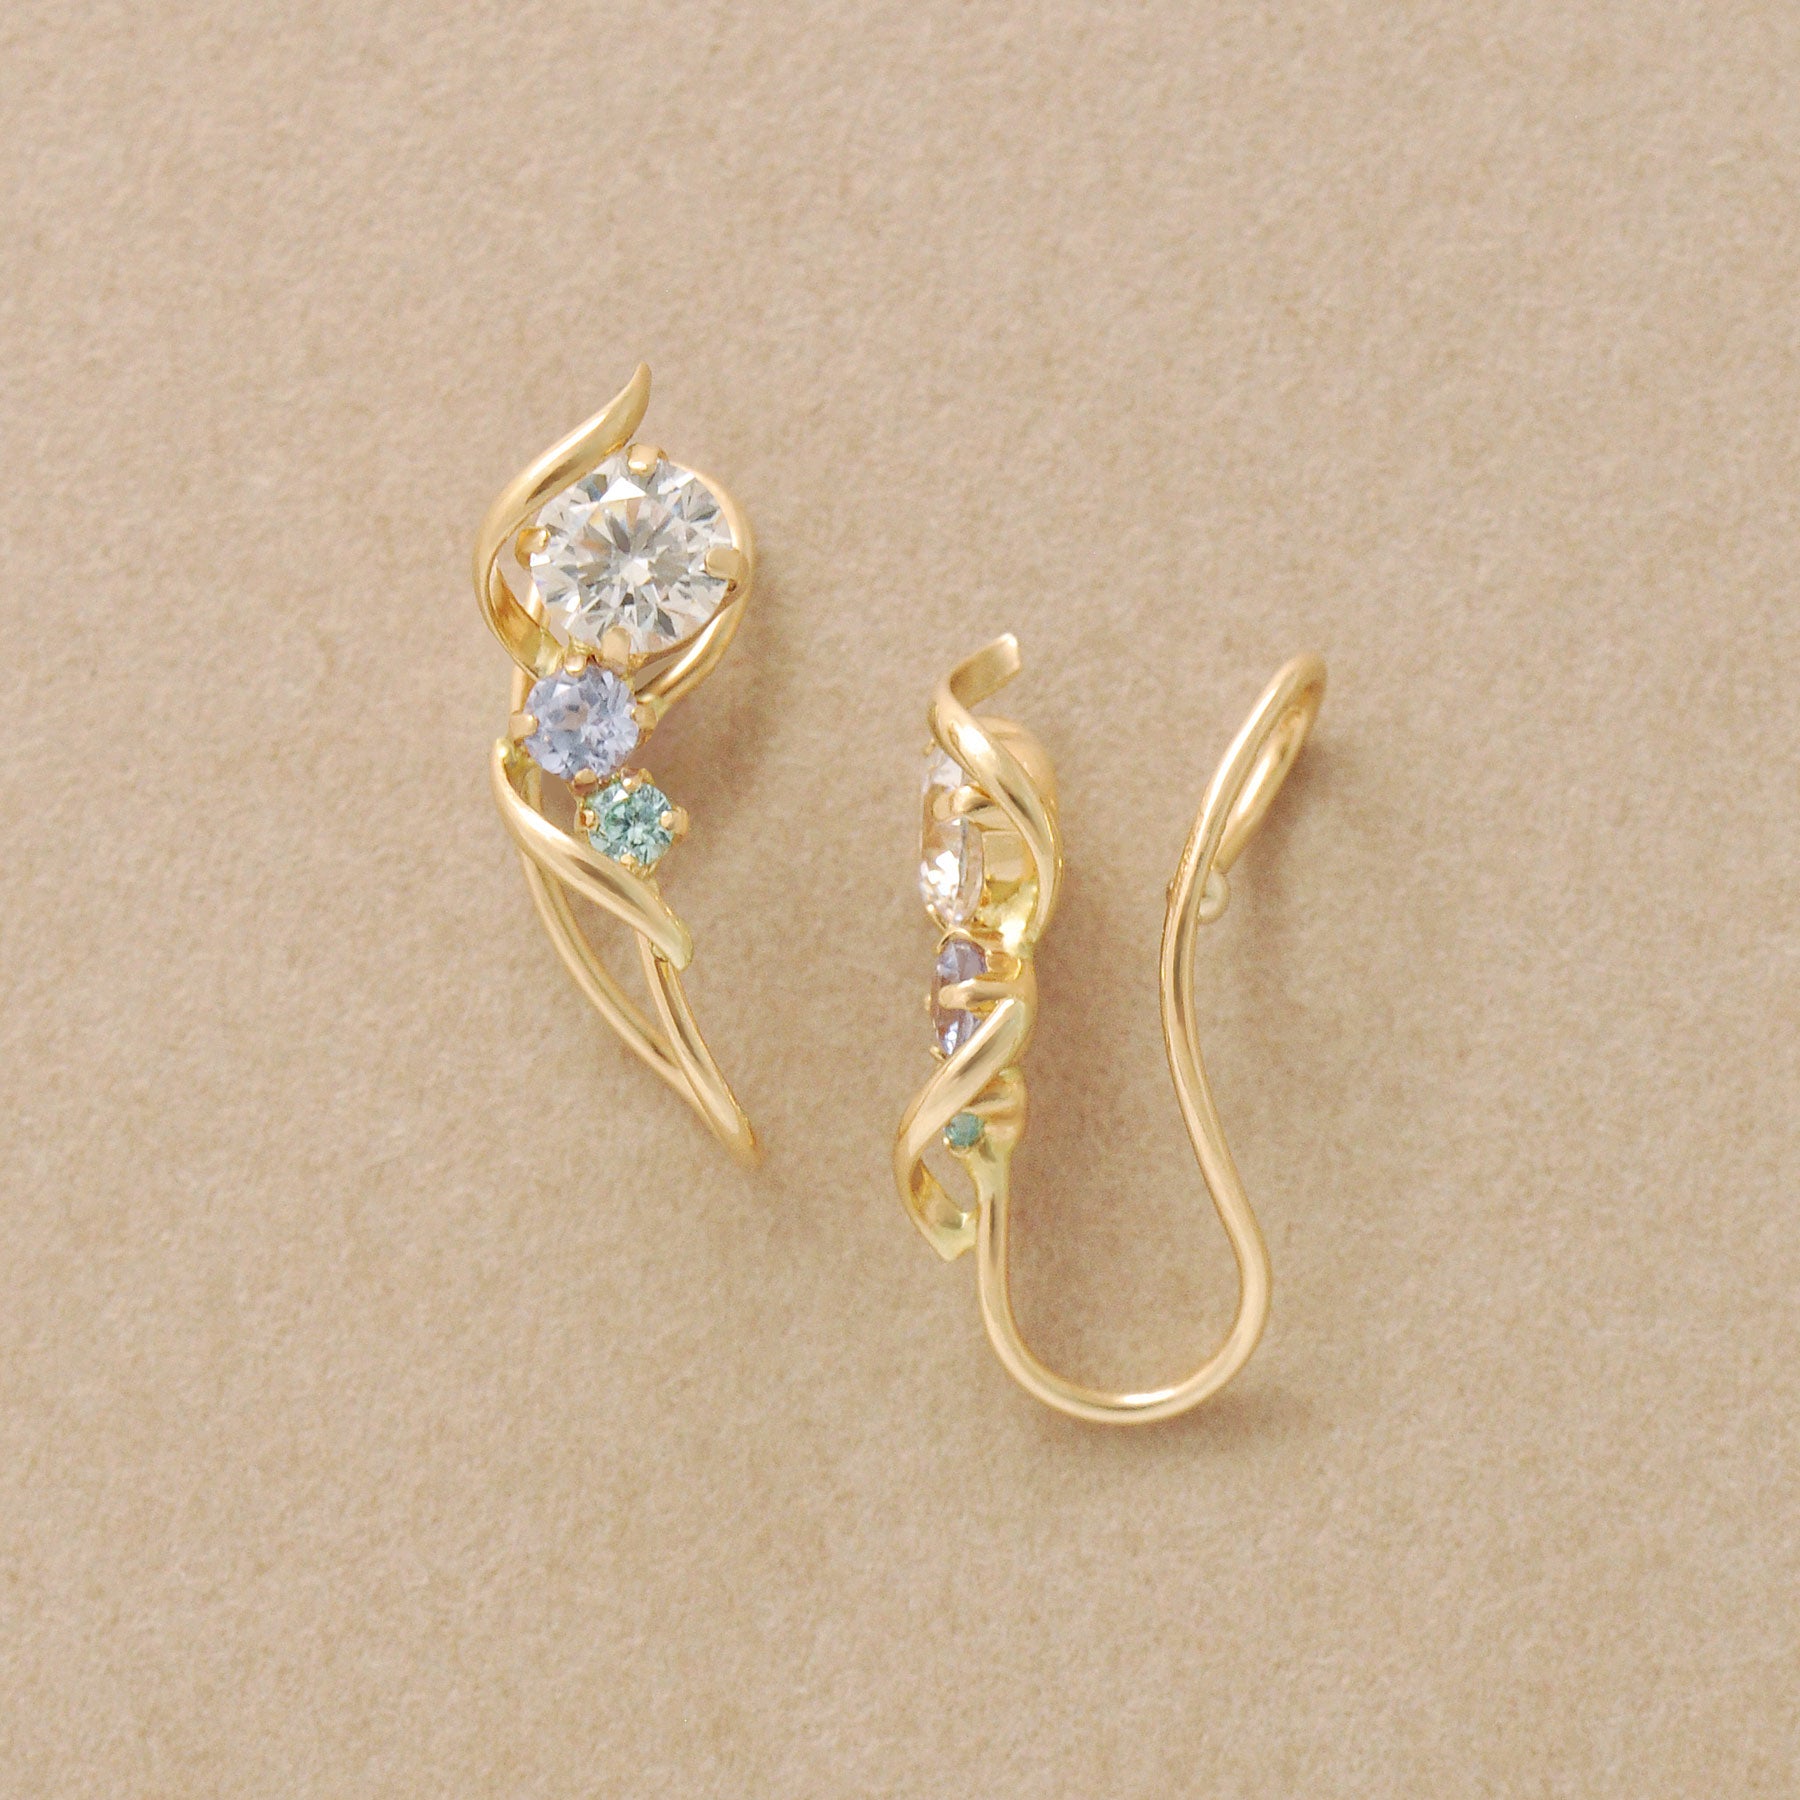 [Airy Clip-On Earrings] 10K Tanzanite Earrings (Yellow Gold) - Product Image